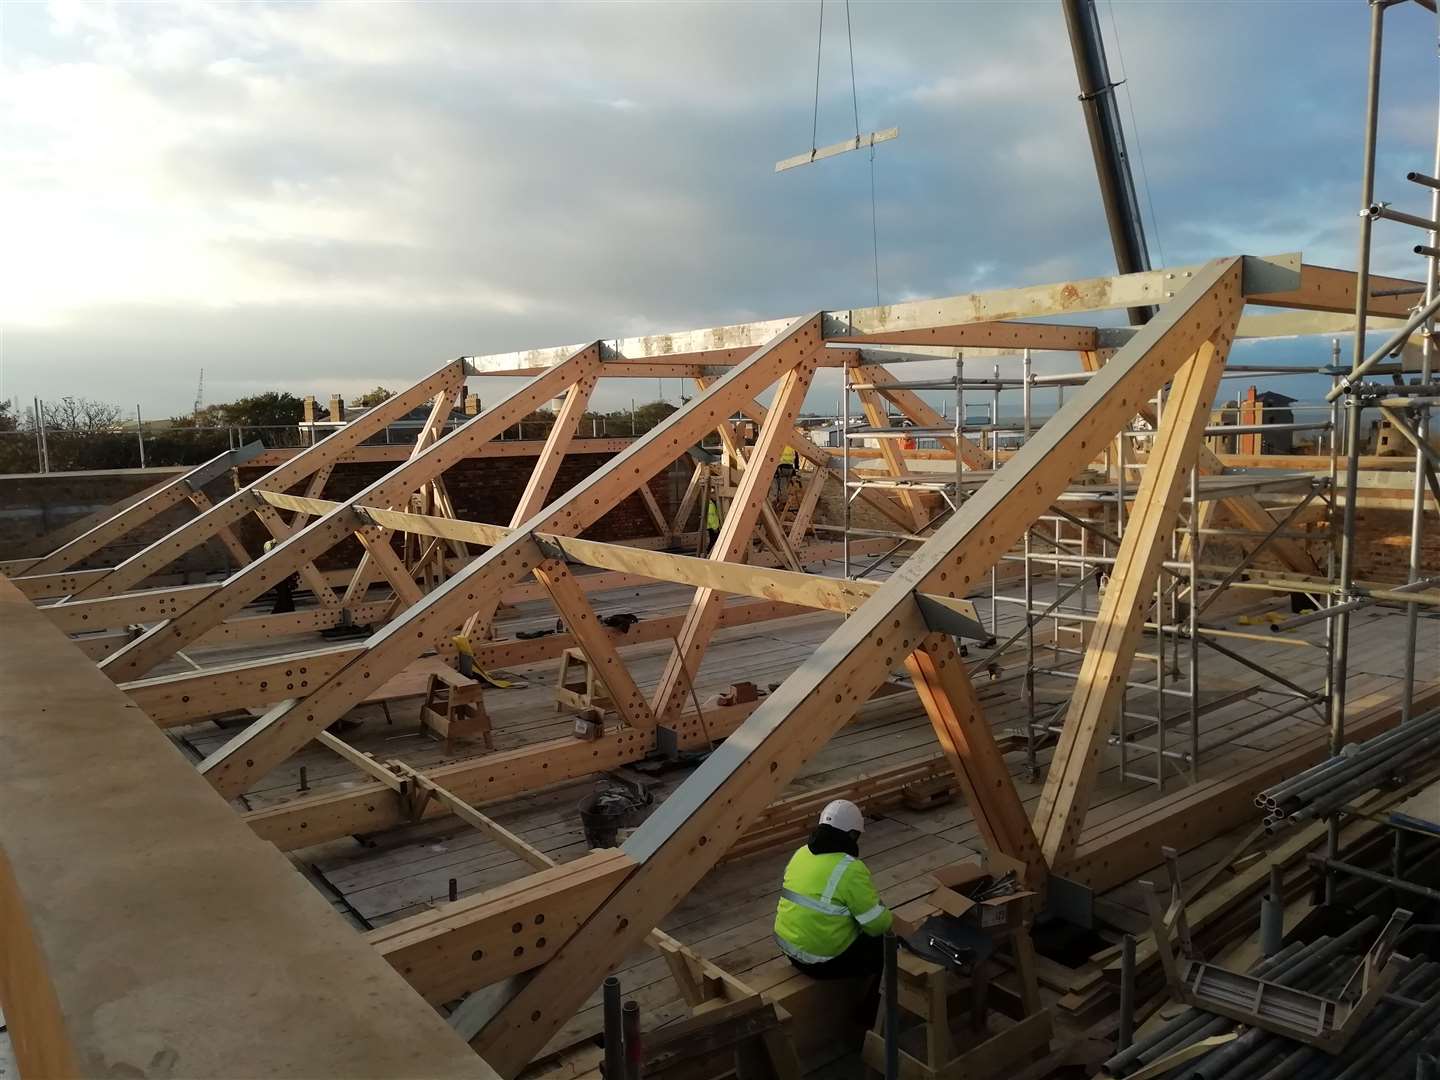 New wooden roof trusses are now in place at the former Sheerness Dockyard church in Blue Town